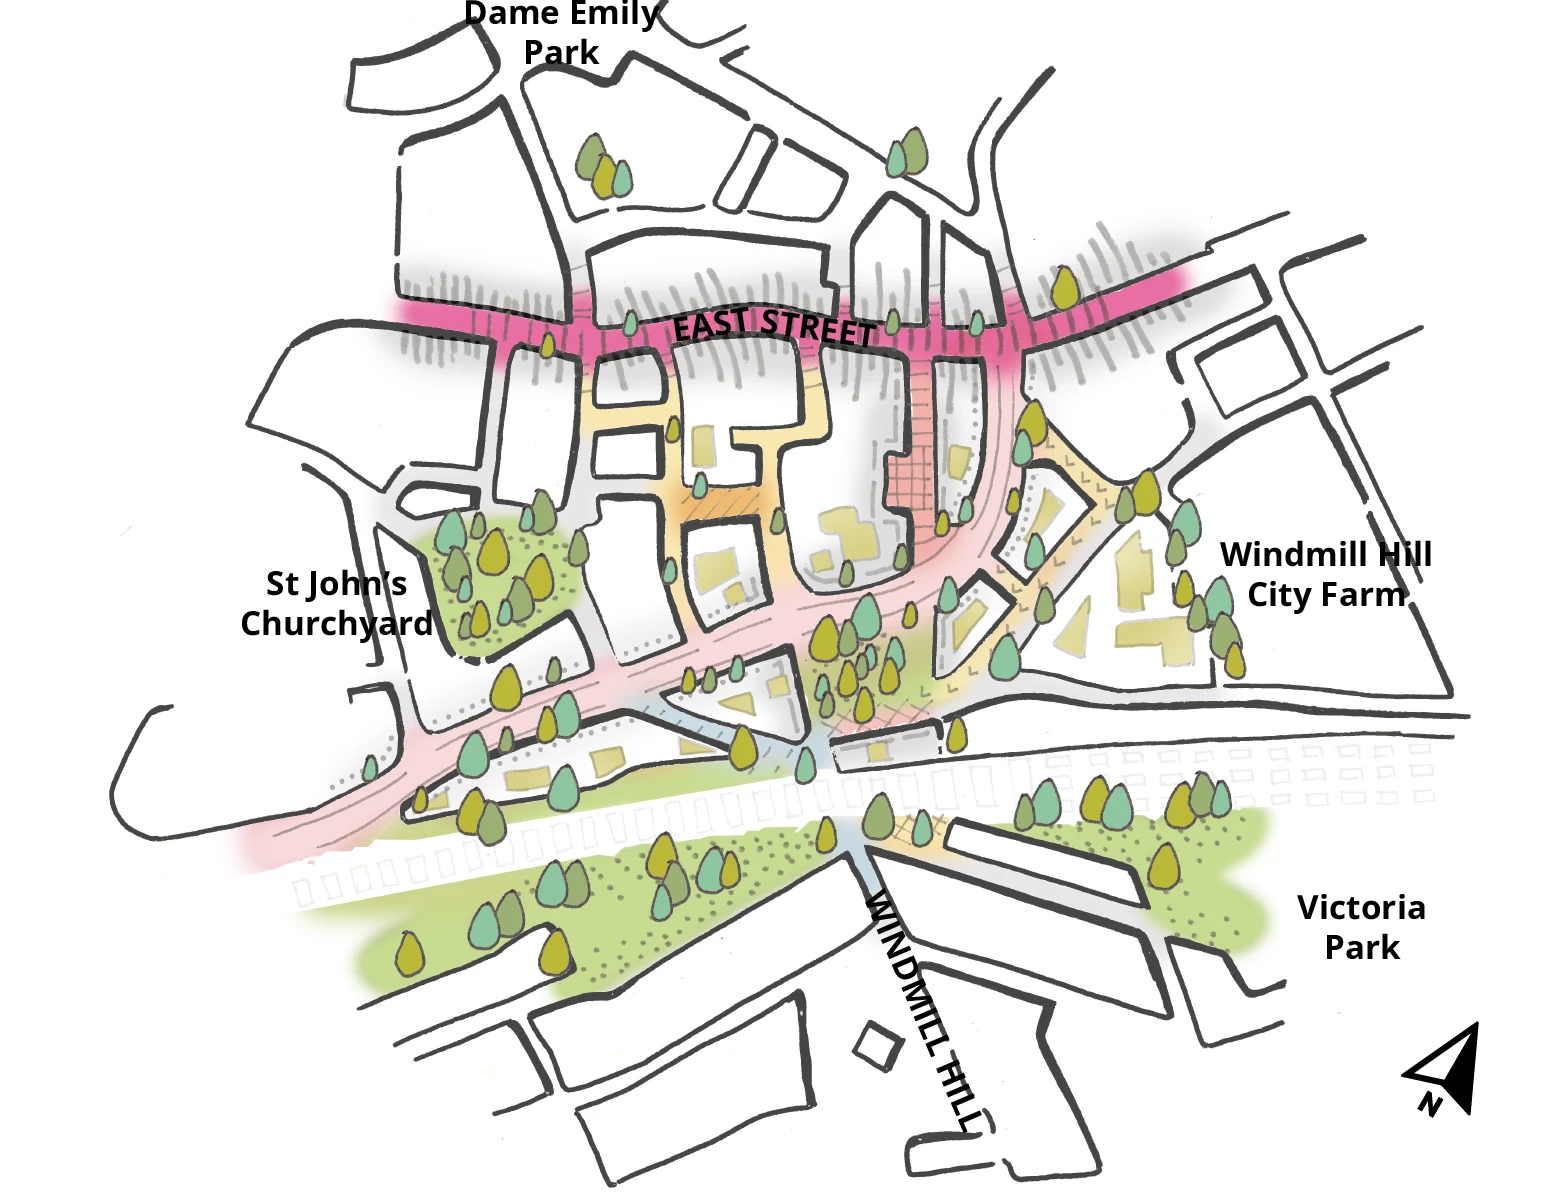 The base of this diagram, which is the same for all the framework diagrams, is a hand drawing showing the urban blocks of the wider Bedminster Green area – East Street is towards the top of the image, Dalby Avenue is in the middle, the railway and Bedminster station is below that and Windmill Hill is at the bottom. East Street is highlighted in pink, with block fronts with dashed black lines. Moving down the diagram shows spaces within the white blocks filled with green shapes and tree symbols.